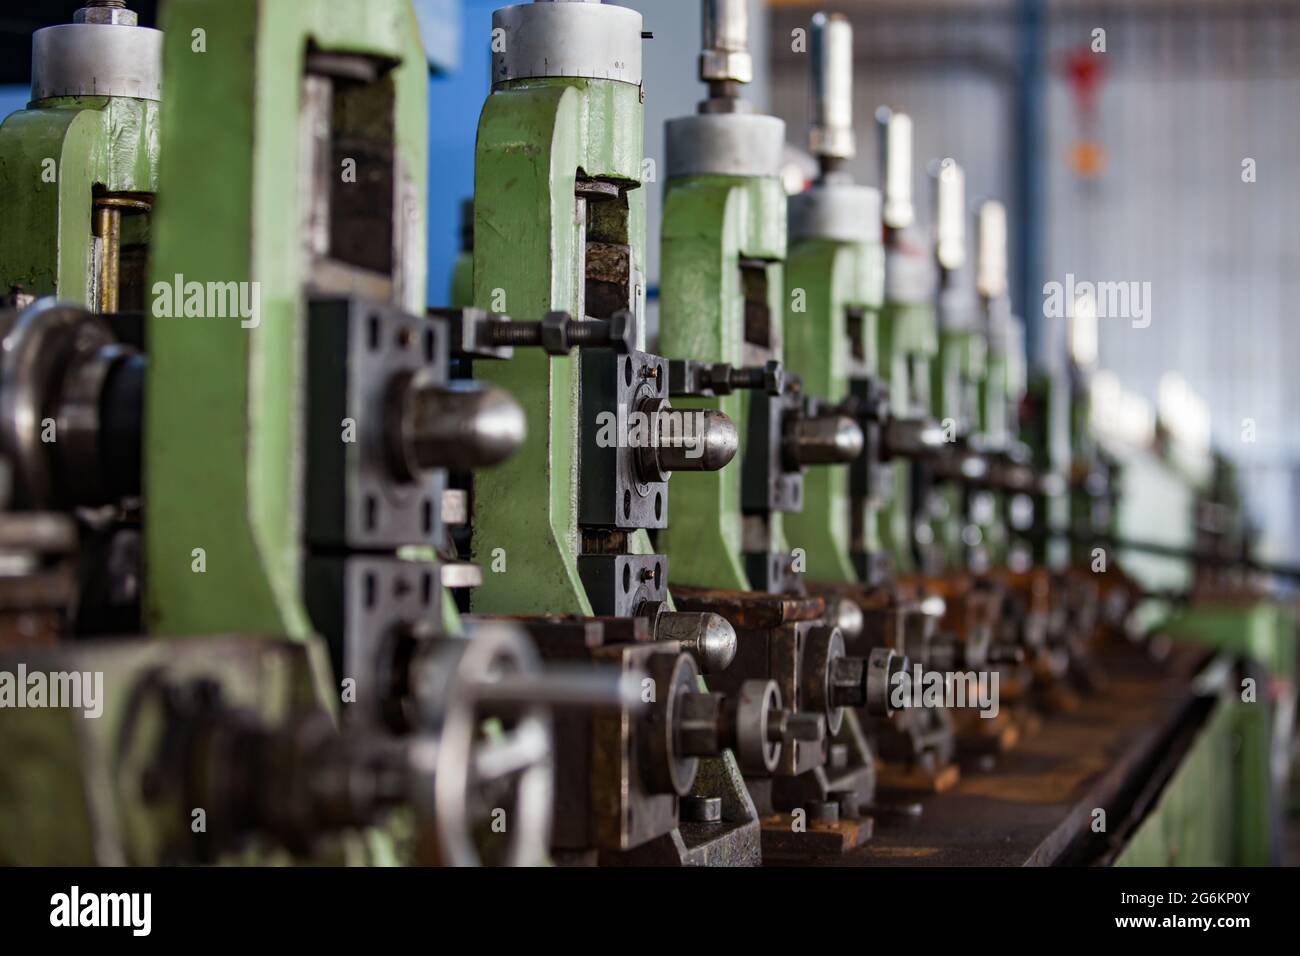 Abstract image of metalworks machine. Green steel parts and grey bolts. Stock Photo